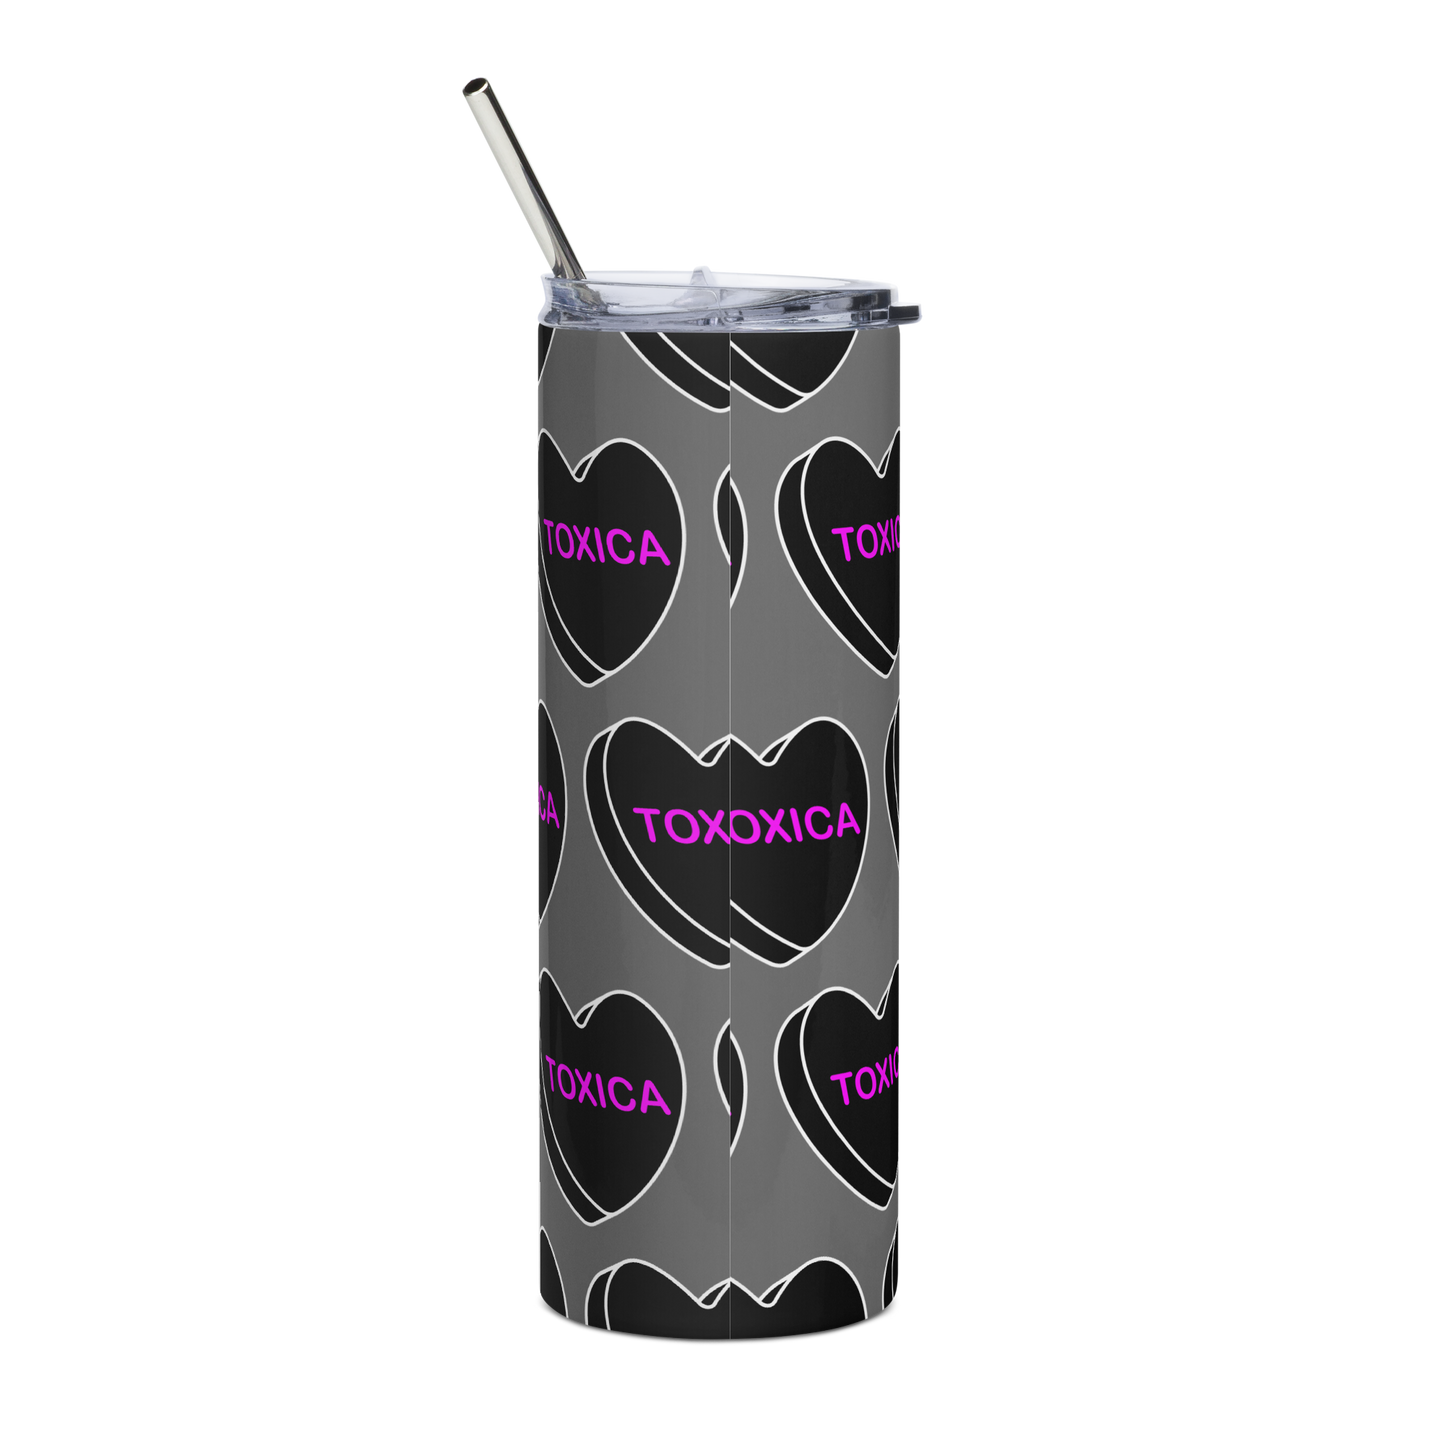 Toxica Candy Conversation Heart - Stainless steel tumbler